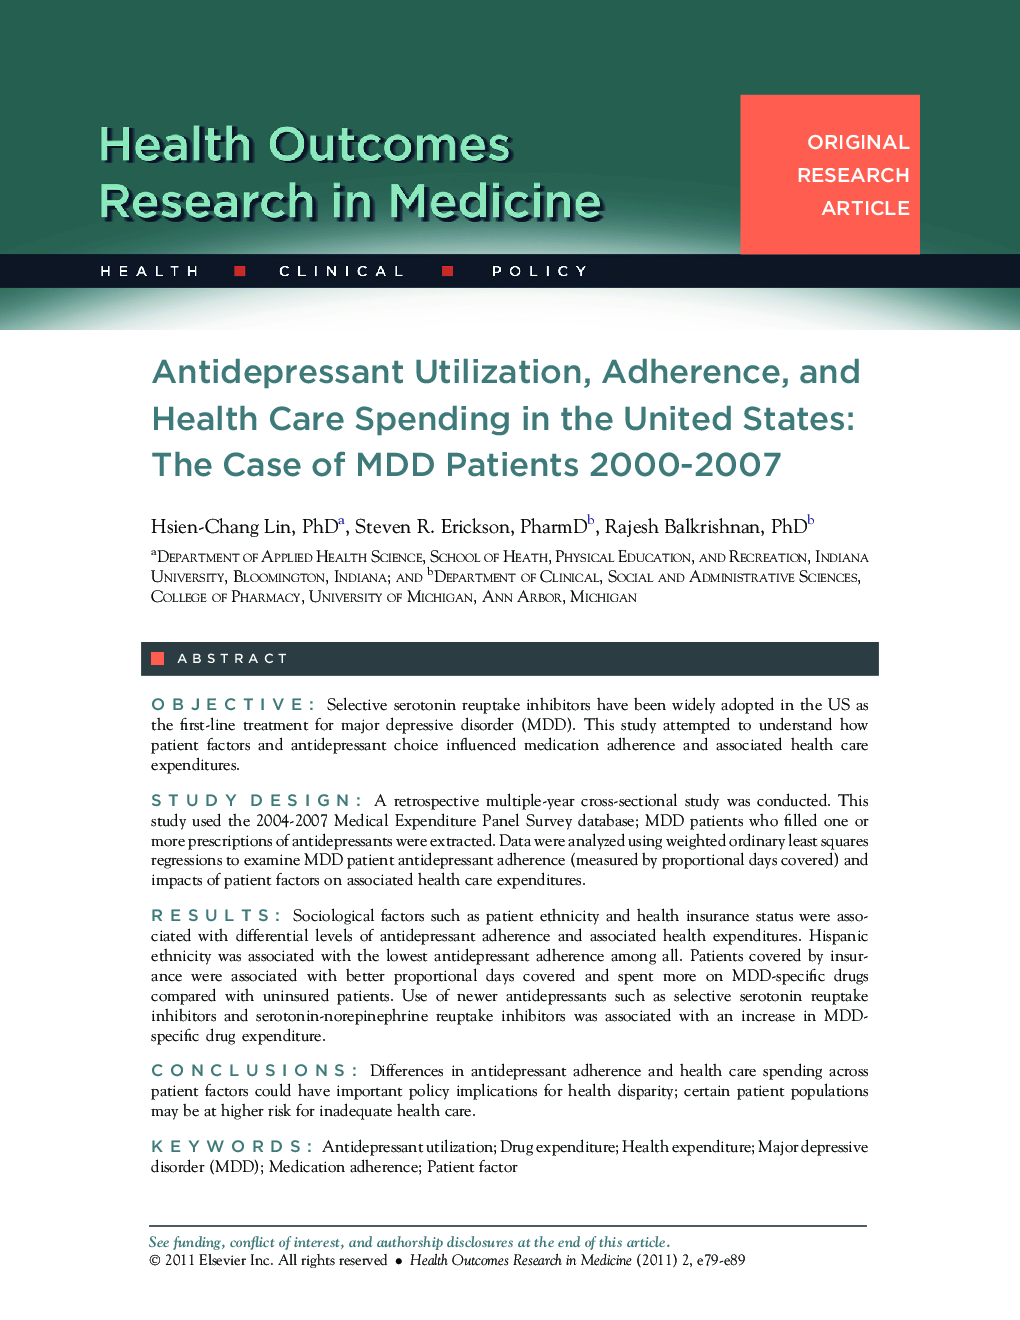 Antidepressant Utilization, Adherence, and Health Care Spending in the United States: The Case of MDD Patients 2000-2007